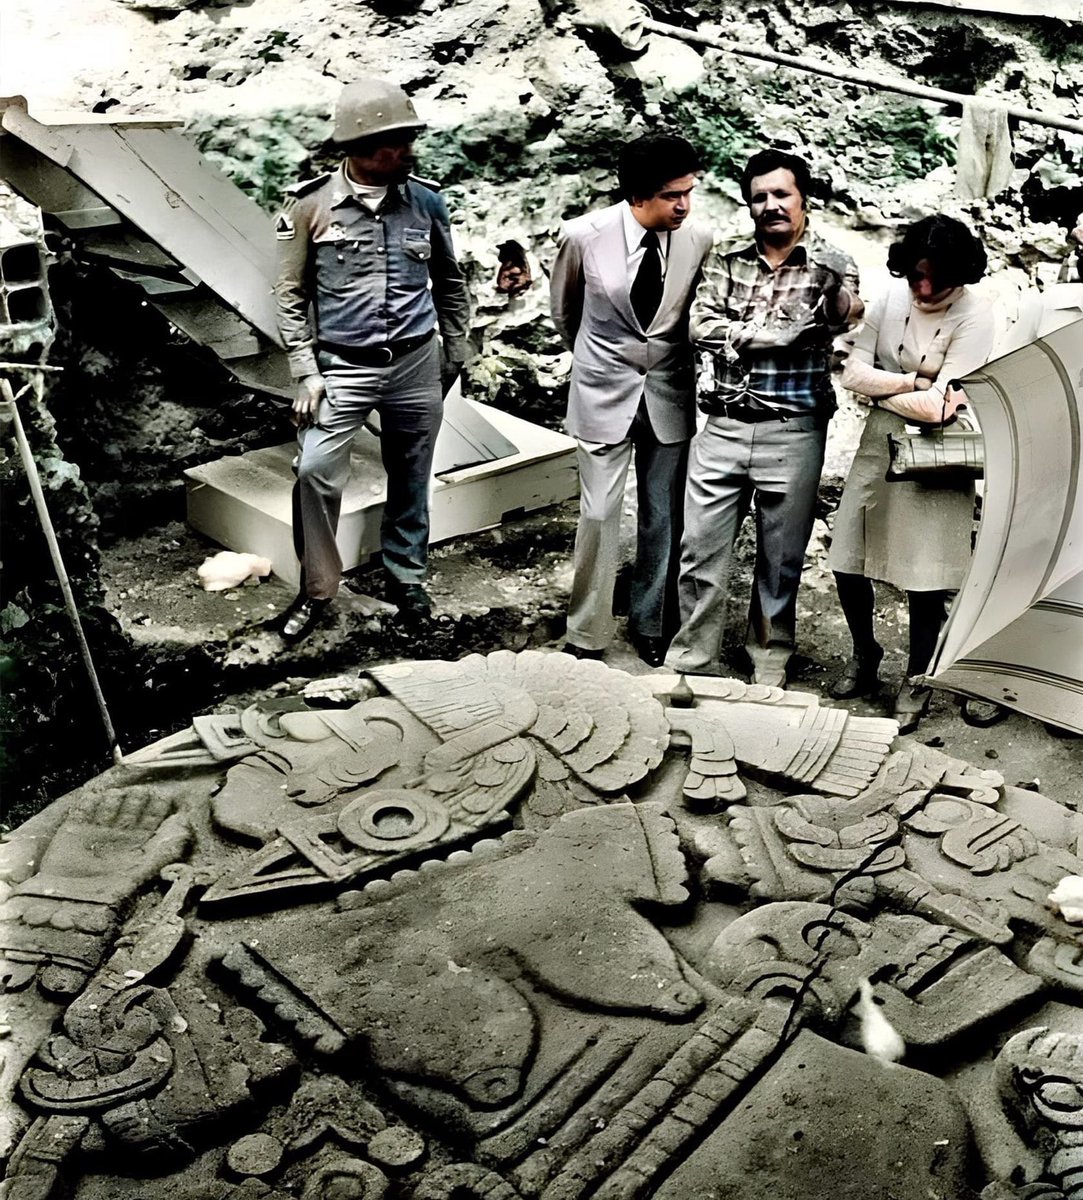 This evocative photo captures a pivotal moment on February 21, 1978, in Mexico City, when the Coyolxauhqui stone was unexpectedly discovered. Located between Argentina and Guatemala Streets, this substantial artifact measures 3.4 by 2.9 meters (about 11.2 by 9.5 feet) and is 0.4